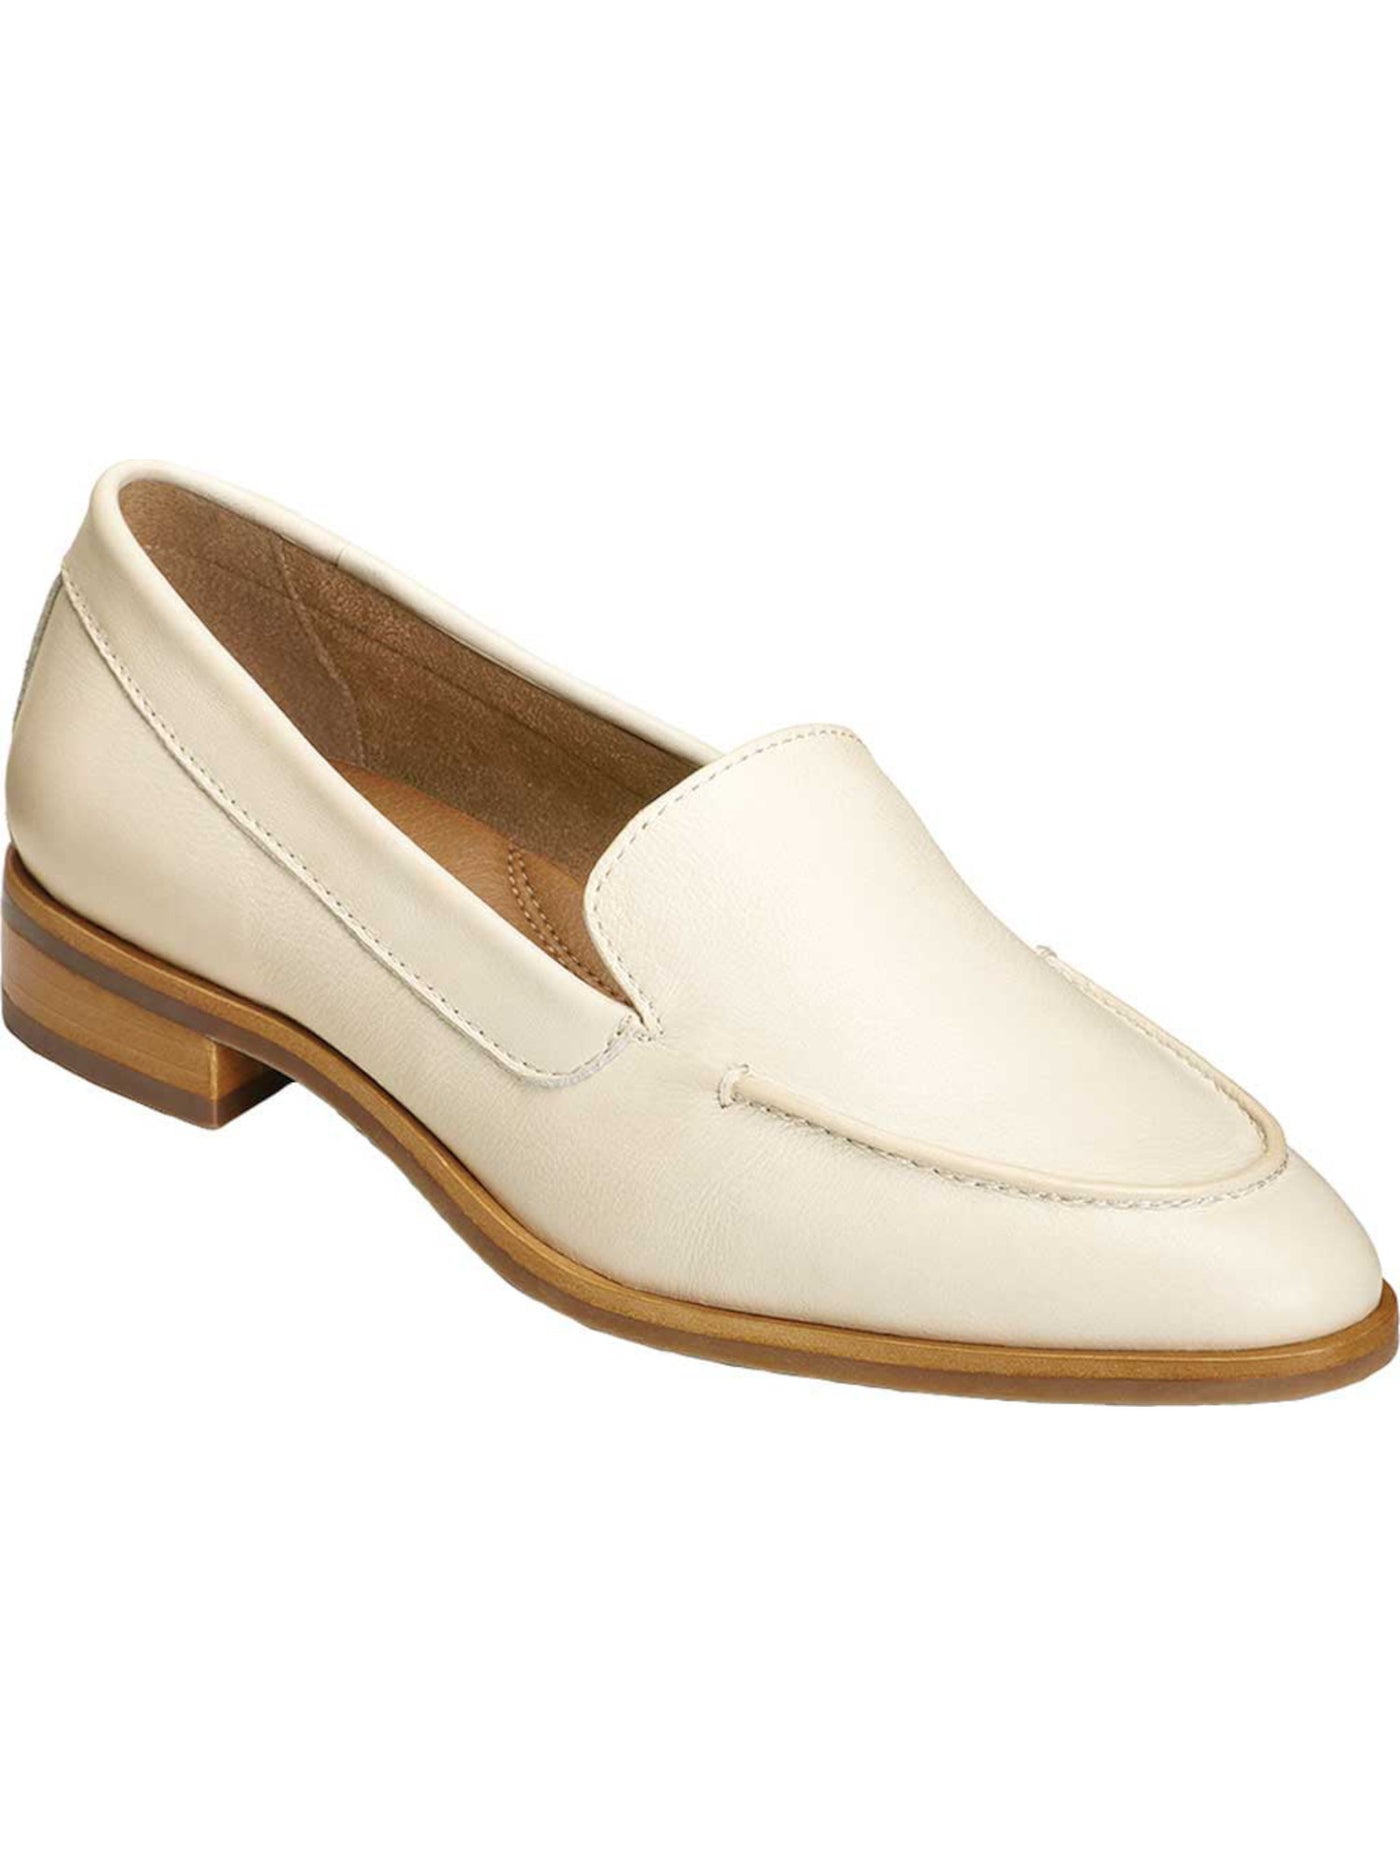 AEROSOLES Womens Ivory Burnished Finish Notched Upper Cushioned East Side Almond Toe Stacked Heel Slip On Leather Loafers Shoes 10 M